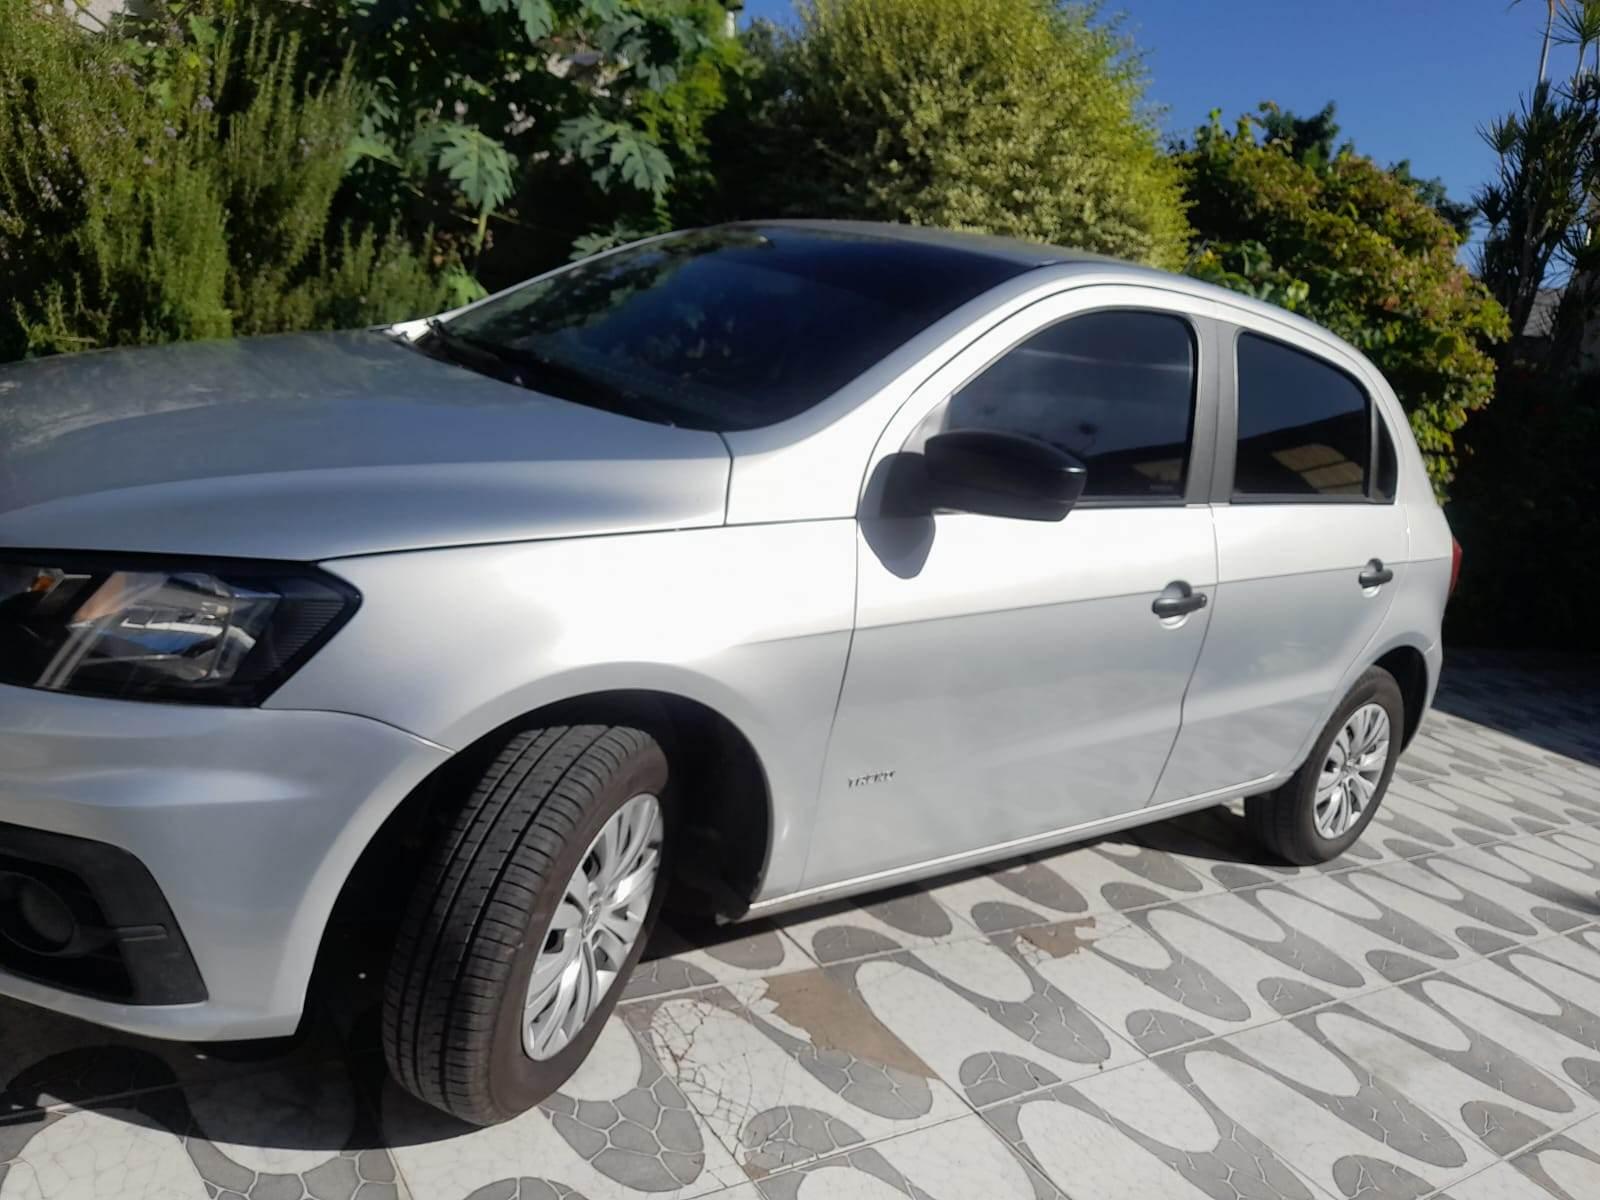 TITULAR VENDE IMPECABLE GOL TREND 2018